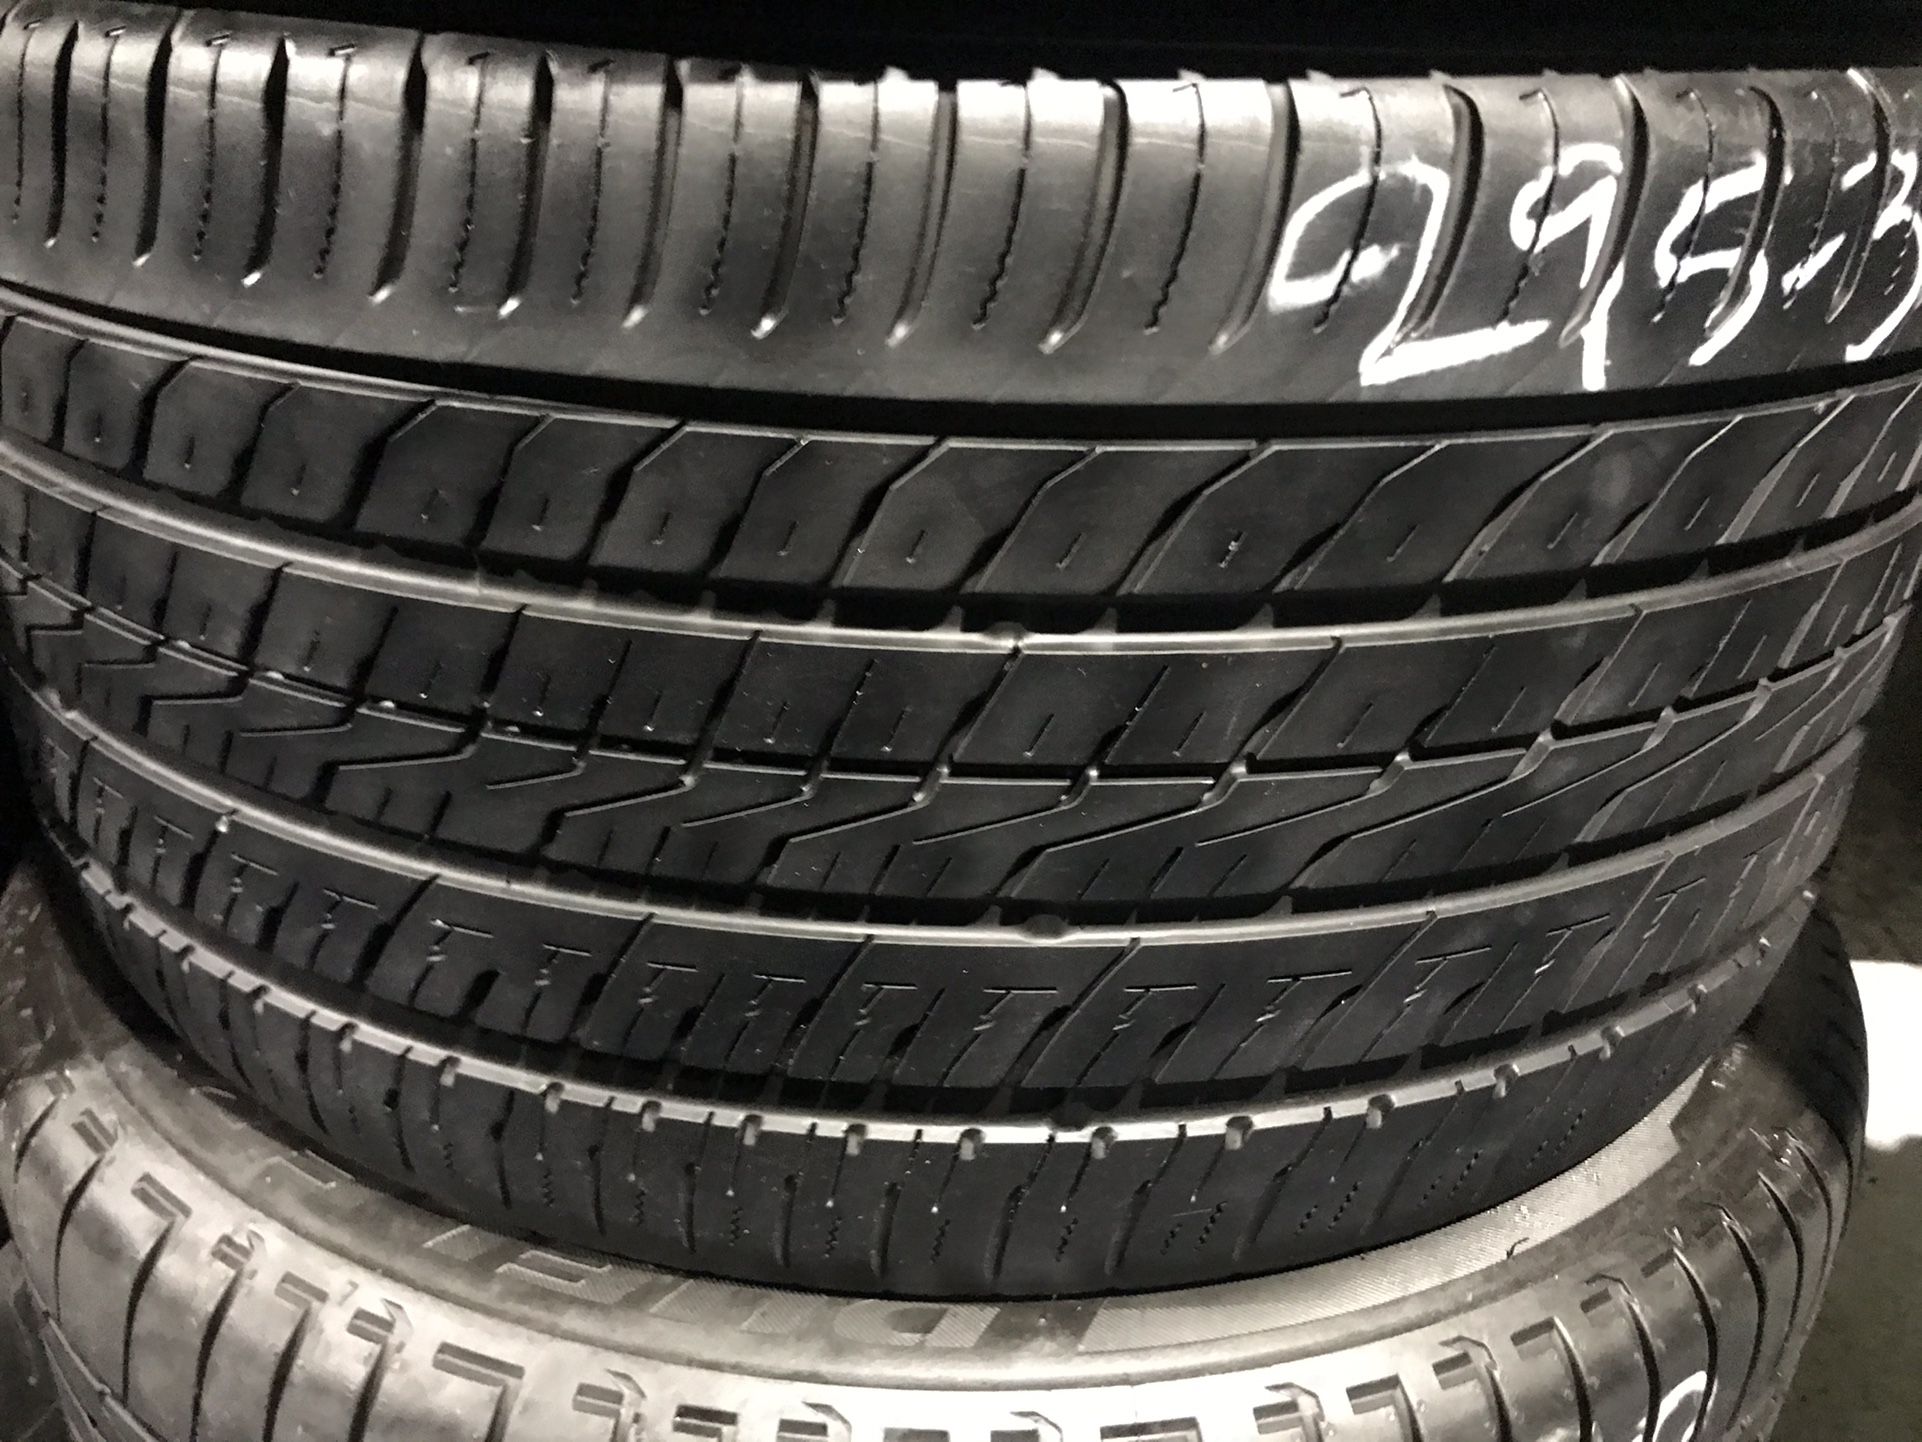 One Tire 295/30/20 Toyo Proxes 4 With 80% Left Only One Like This